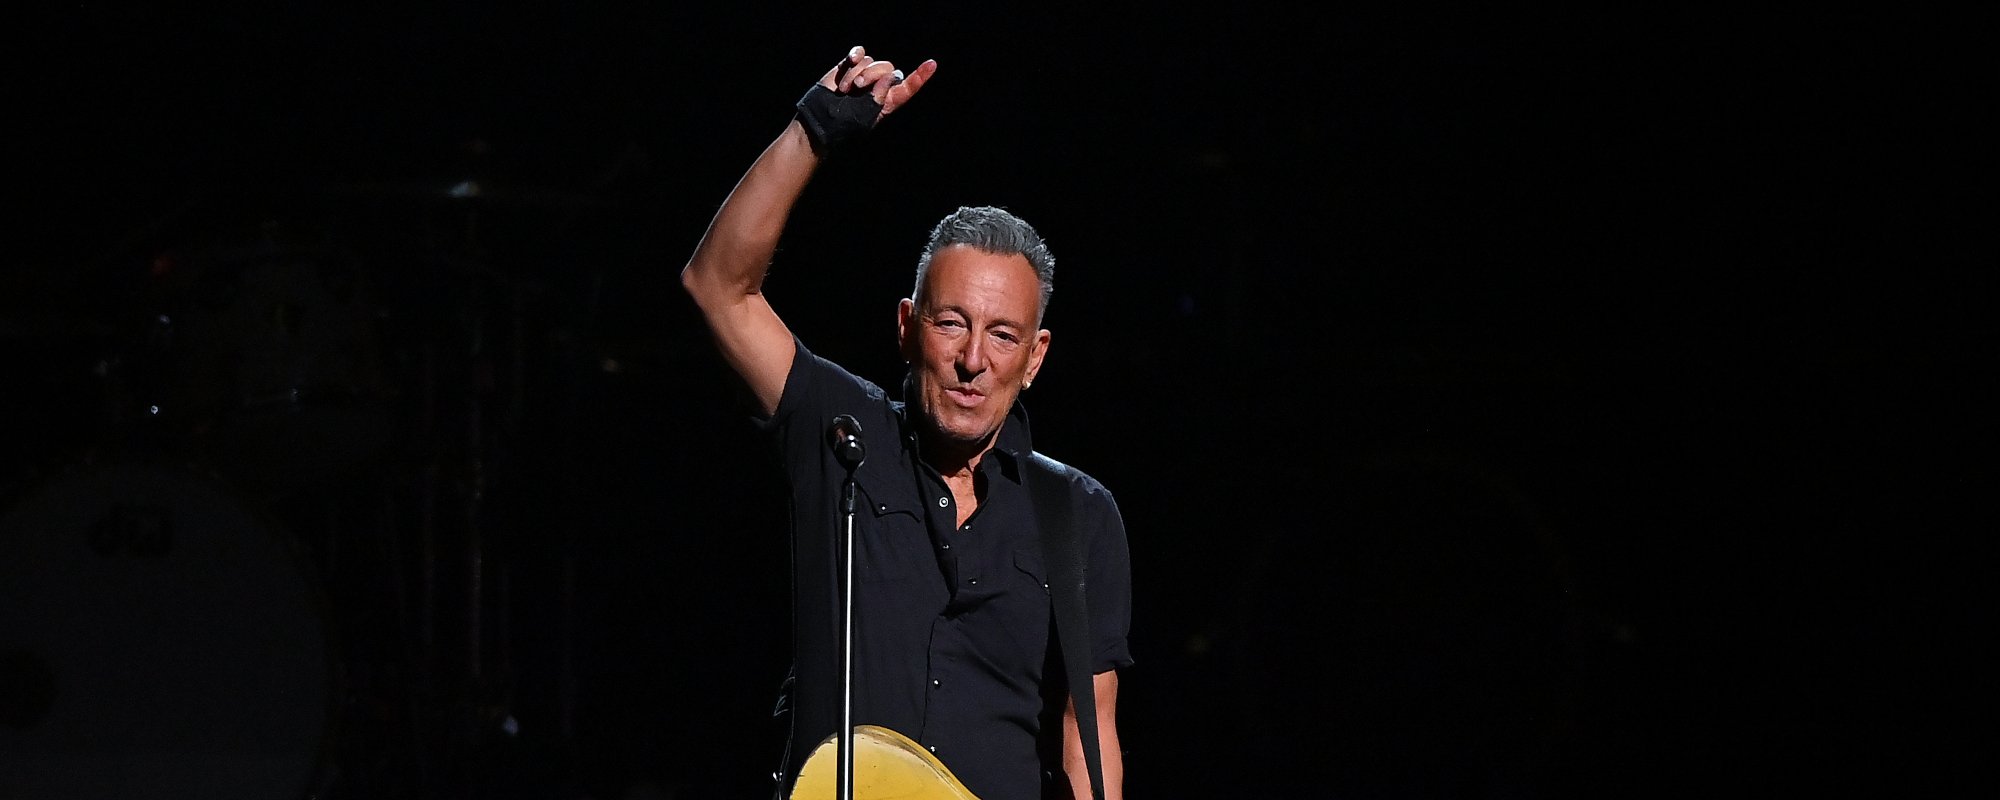 Bruce Springsteen Writes New Song ‘Addicted to Romance’ for New Rom-Com ‘She Came to Me’